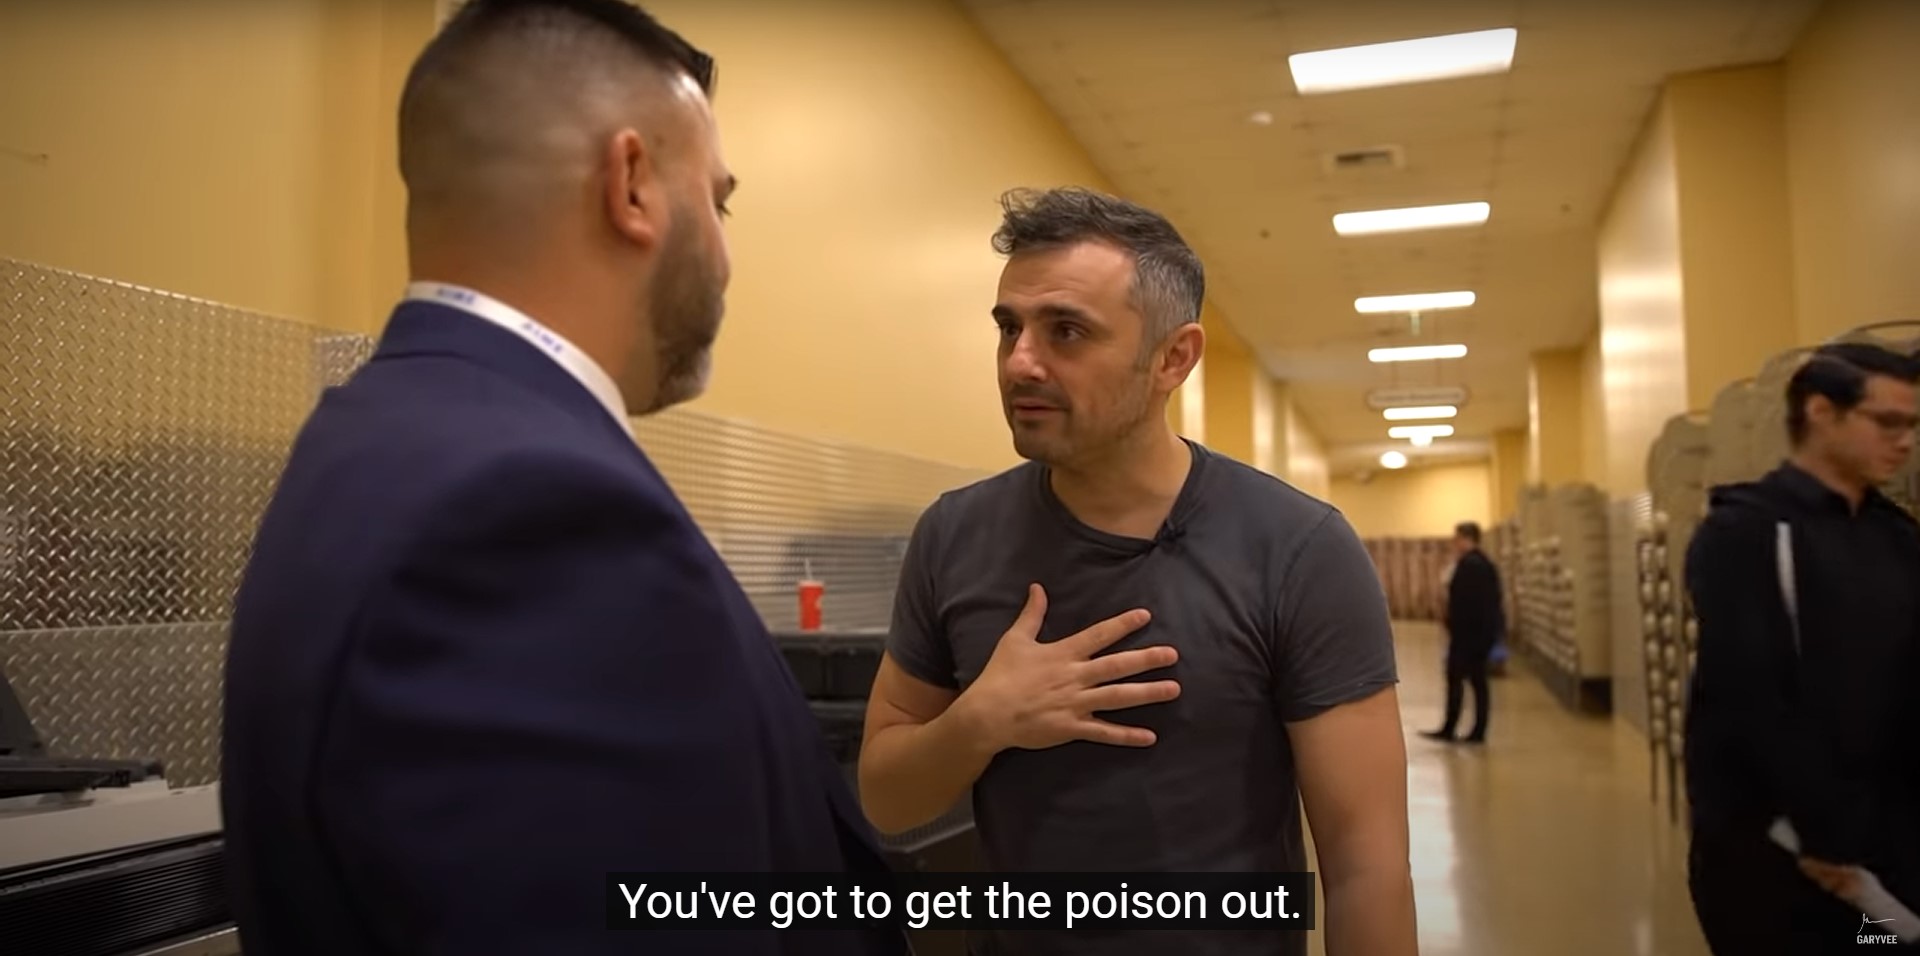 LAS VEGAS, NV | OCT 22, 2019<br />Gary Vaynerchuk (right) admonishing a fan to "get the poison out" and talk about what's troubling him and disrupting his life.